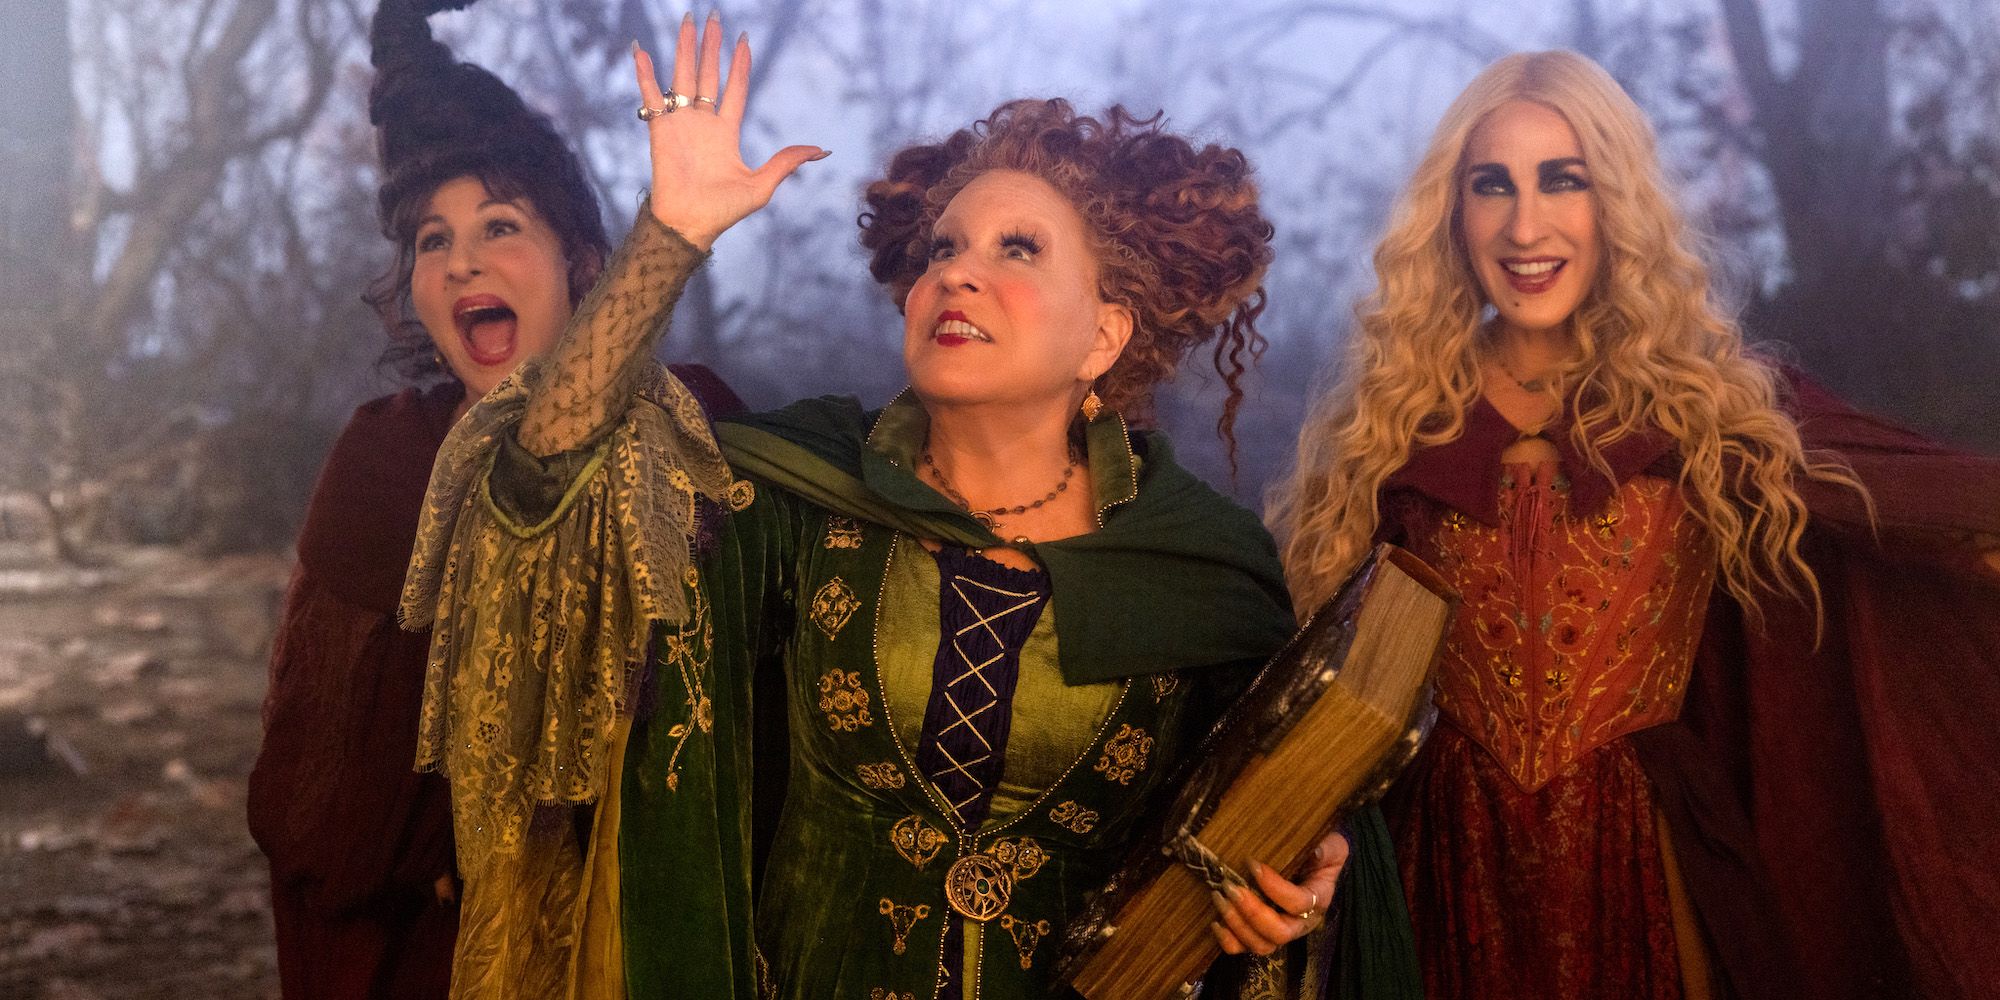 Kathy Najimy as Mary Sanderson Bette Midler as Winifred Sanderson and Sarah Jessica Parker as Sarah Sanderson in Disney live-action HOCUS POCUS 2